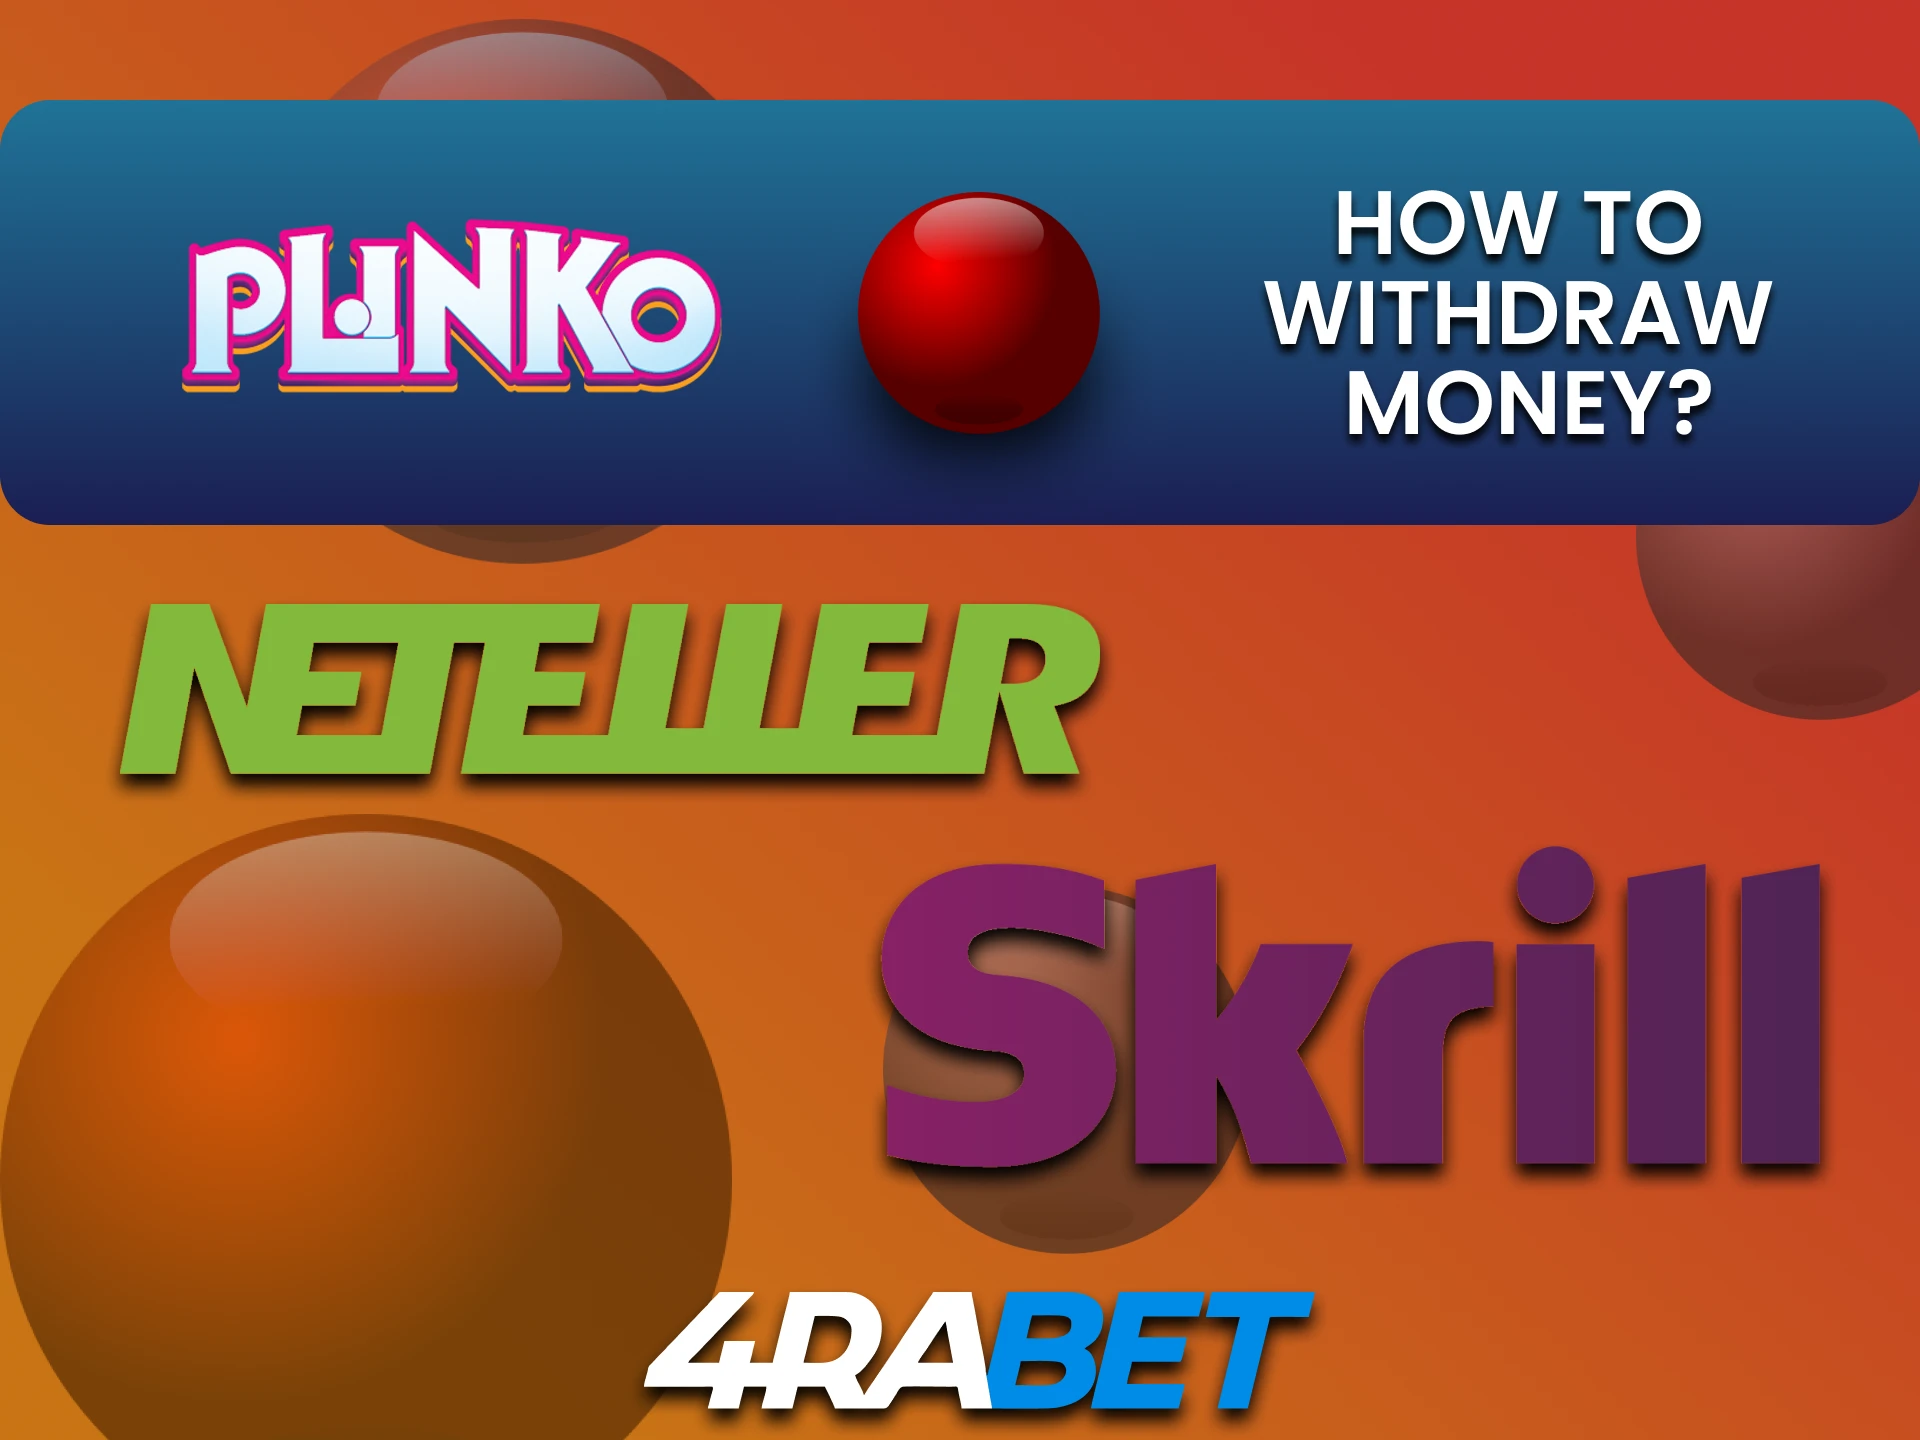 We will tell you about the ways to withdraw funds to 4rabet for Plinko.